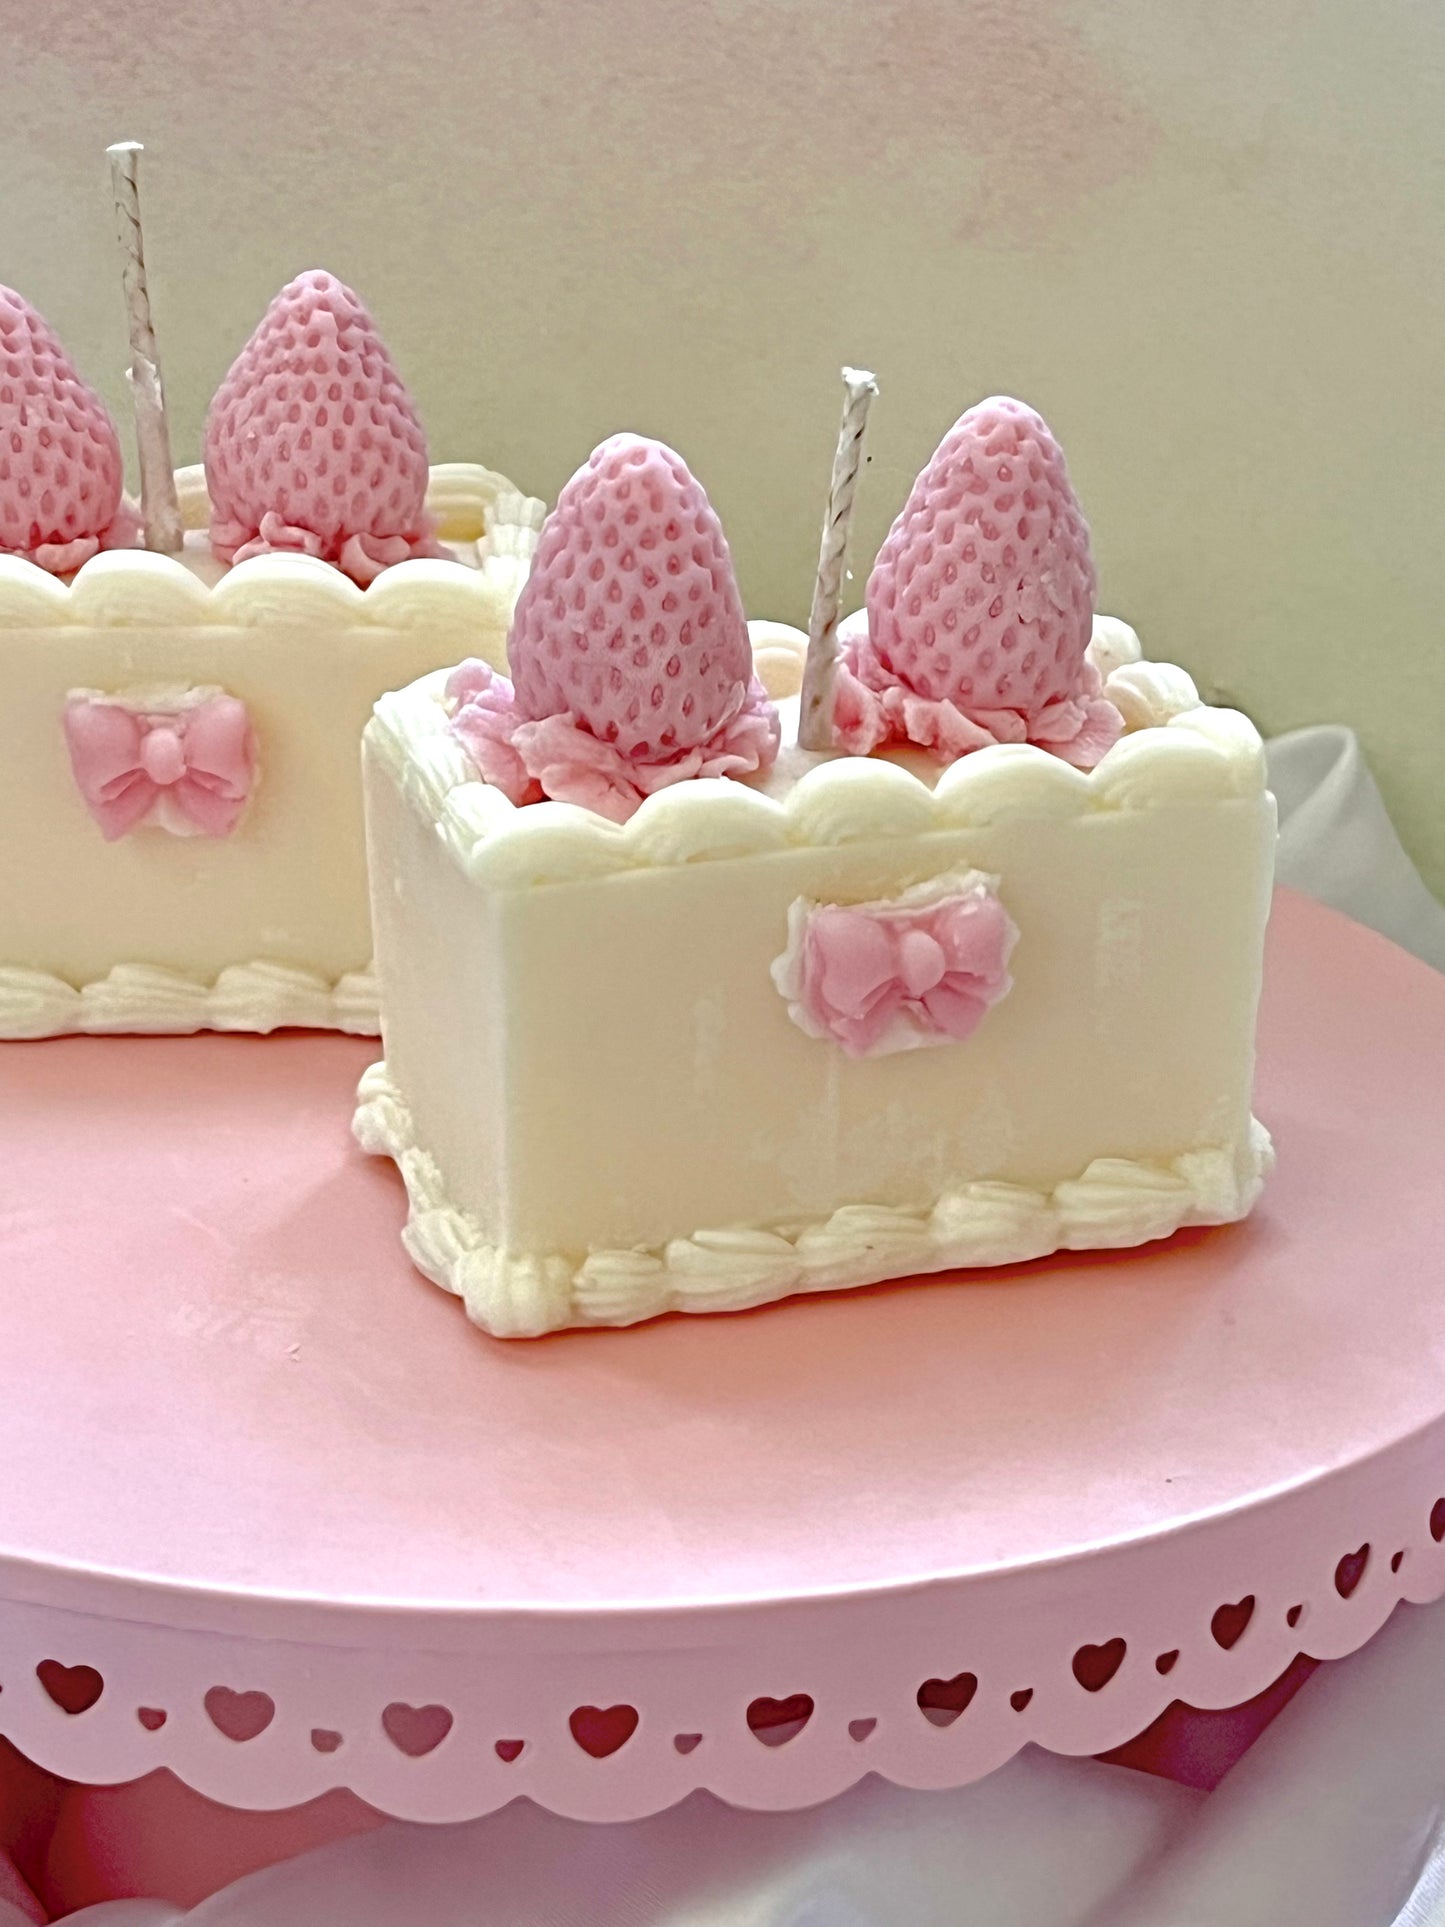 Frosted Cake with Bows & Strawberries